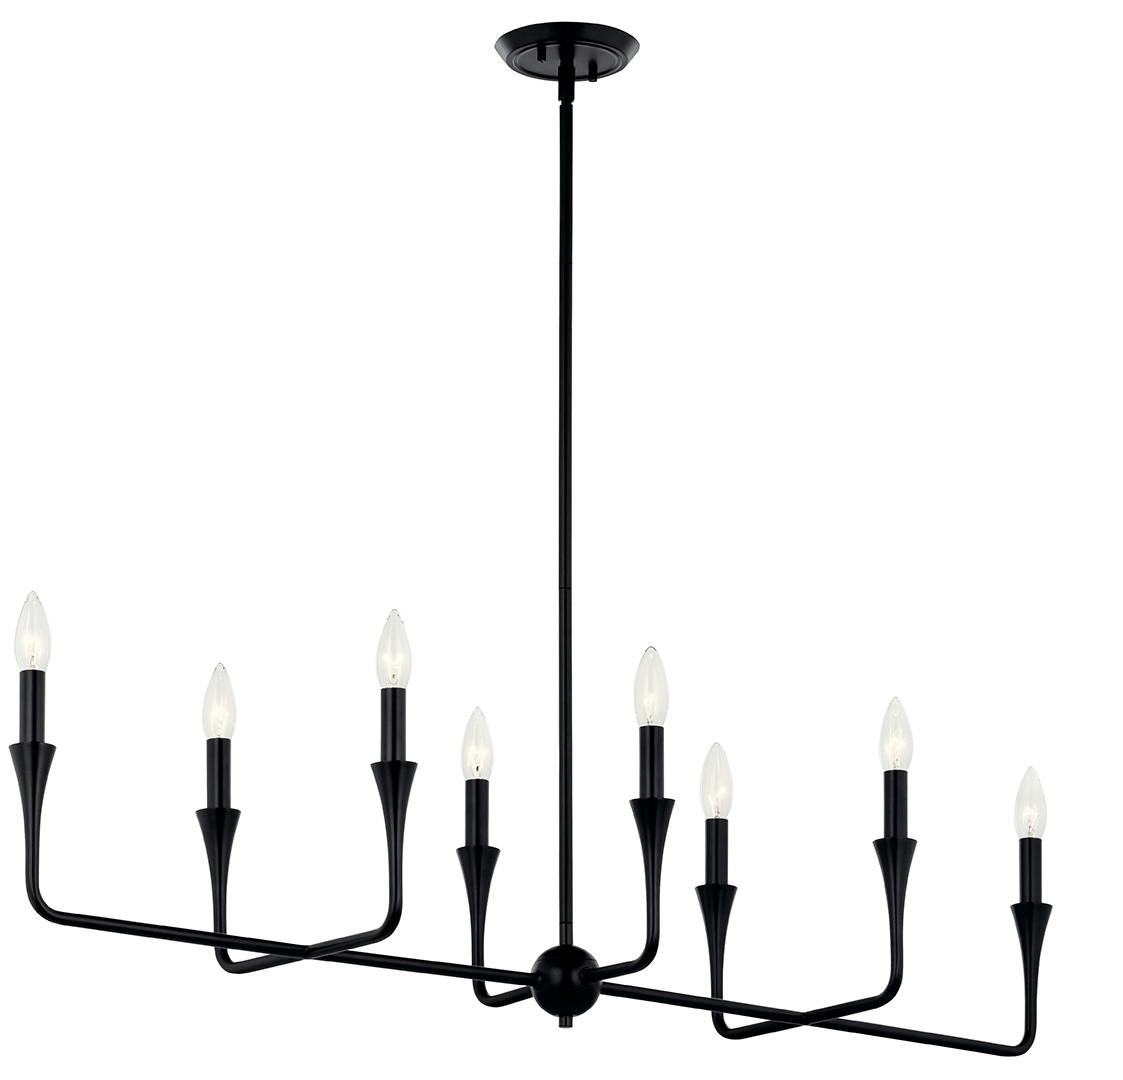 The Alvaro 45.5 Inch 8 Light Linear Chandelier in Black on a white background